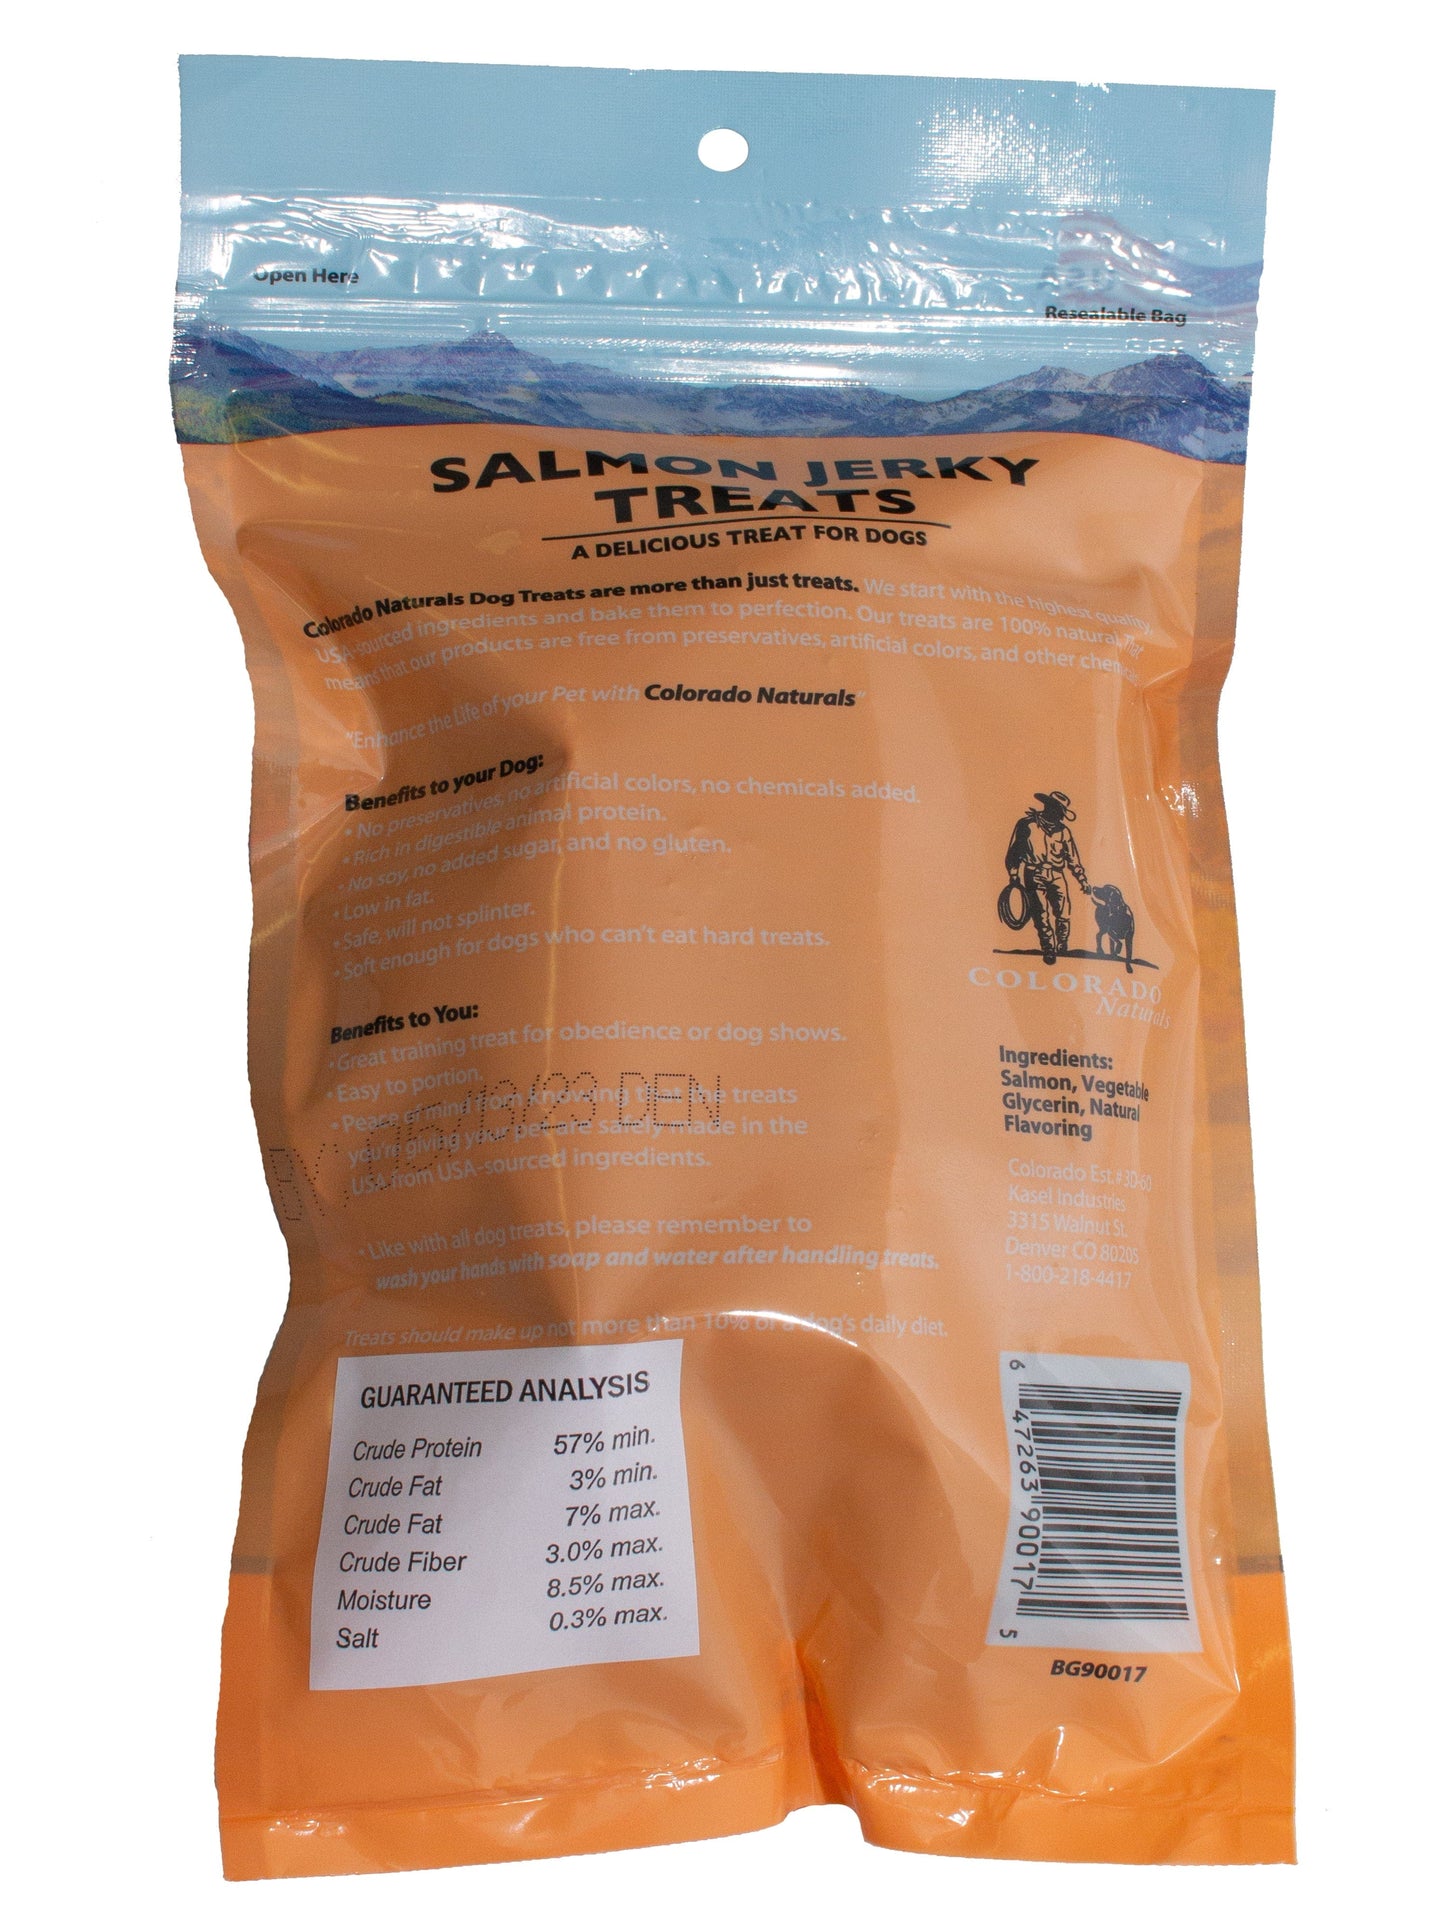 A photo of the back of the best 4 oz Salmon Jerky Dog Treats from Colorado Pet Treats by Colorado Naturals. Colorado Pet Treats - All-Natural, All-American Dog Jerky, Jerky Chips, and Bones - Treat your furry friend to our delicious and healthy pet treats made with only the finest ingredients sourced in the USA. Delicious and chewy all-American dog jerky made with natural ingredients sourced in Colorado.